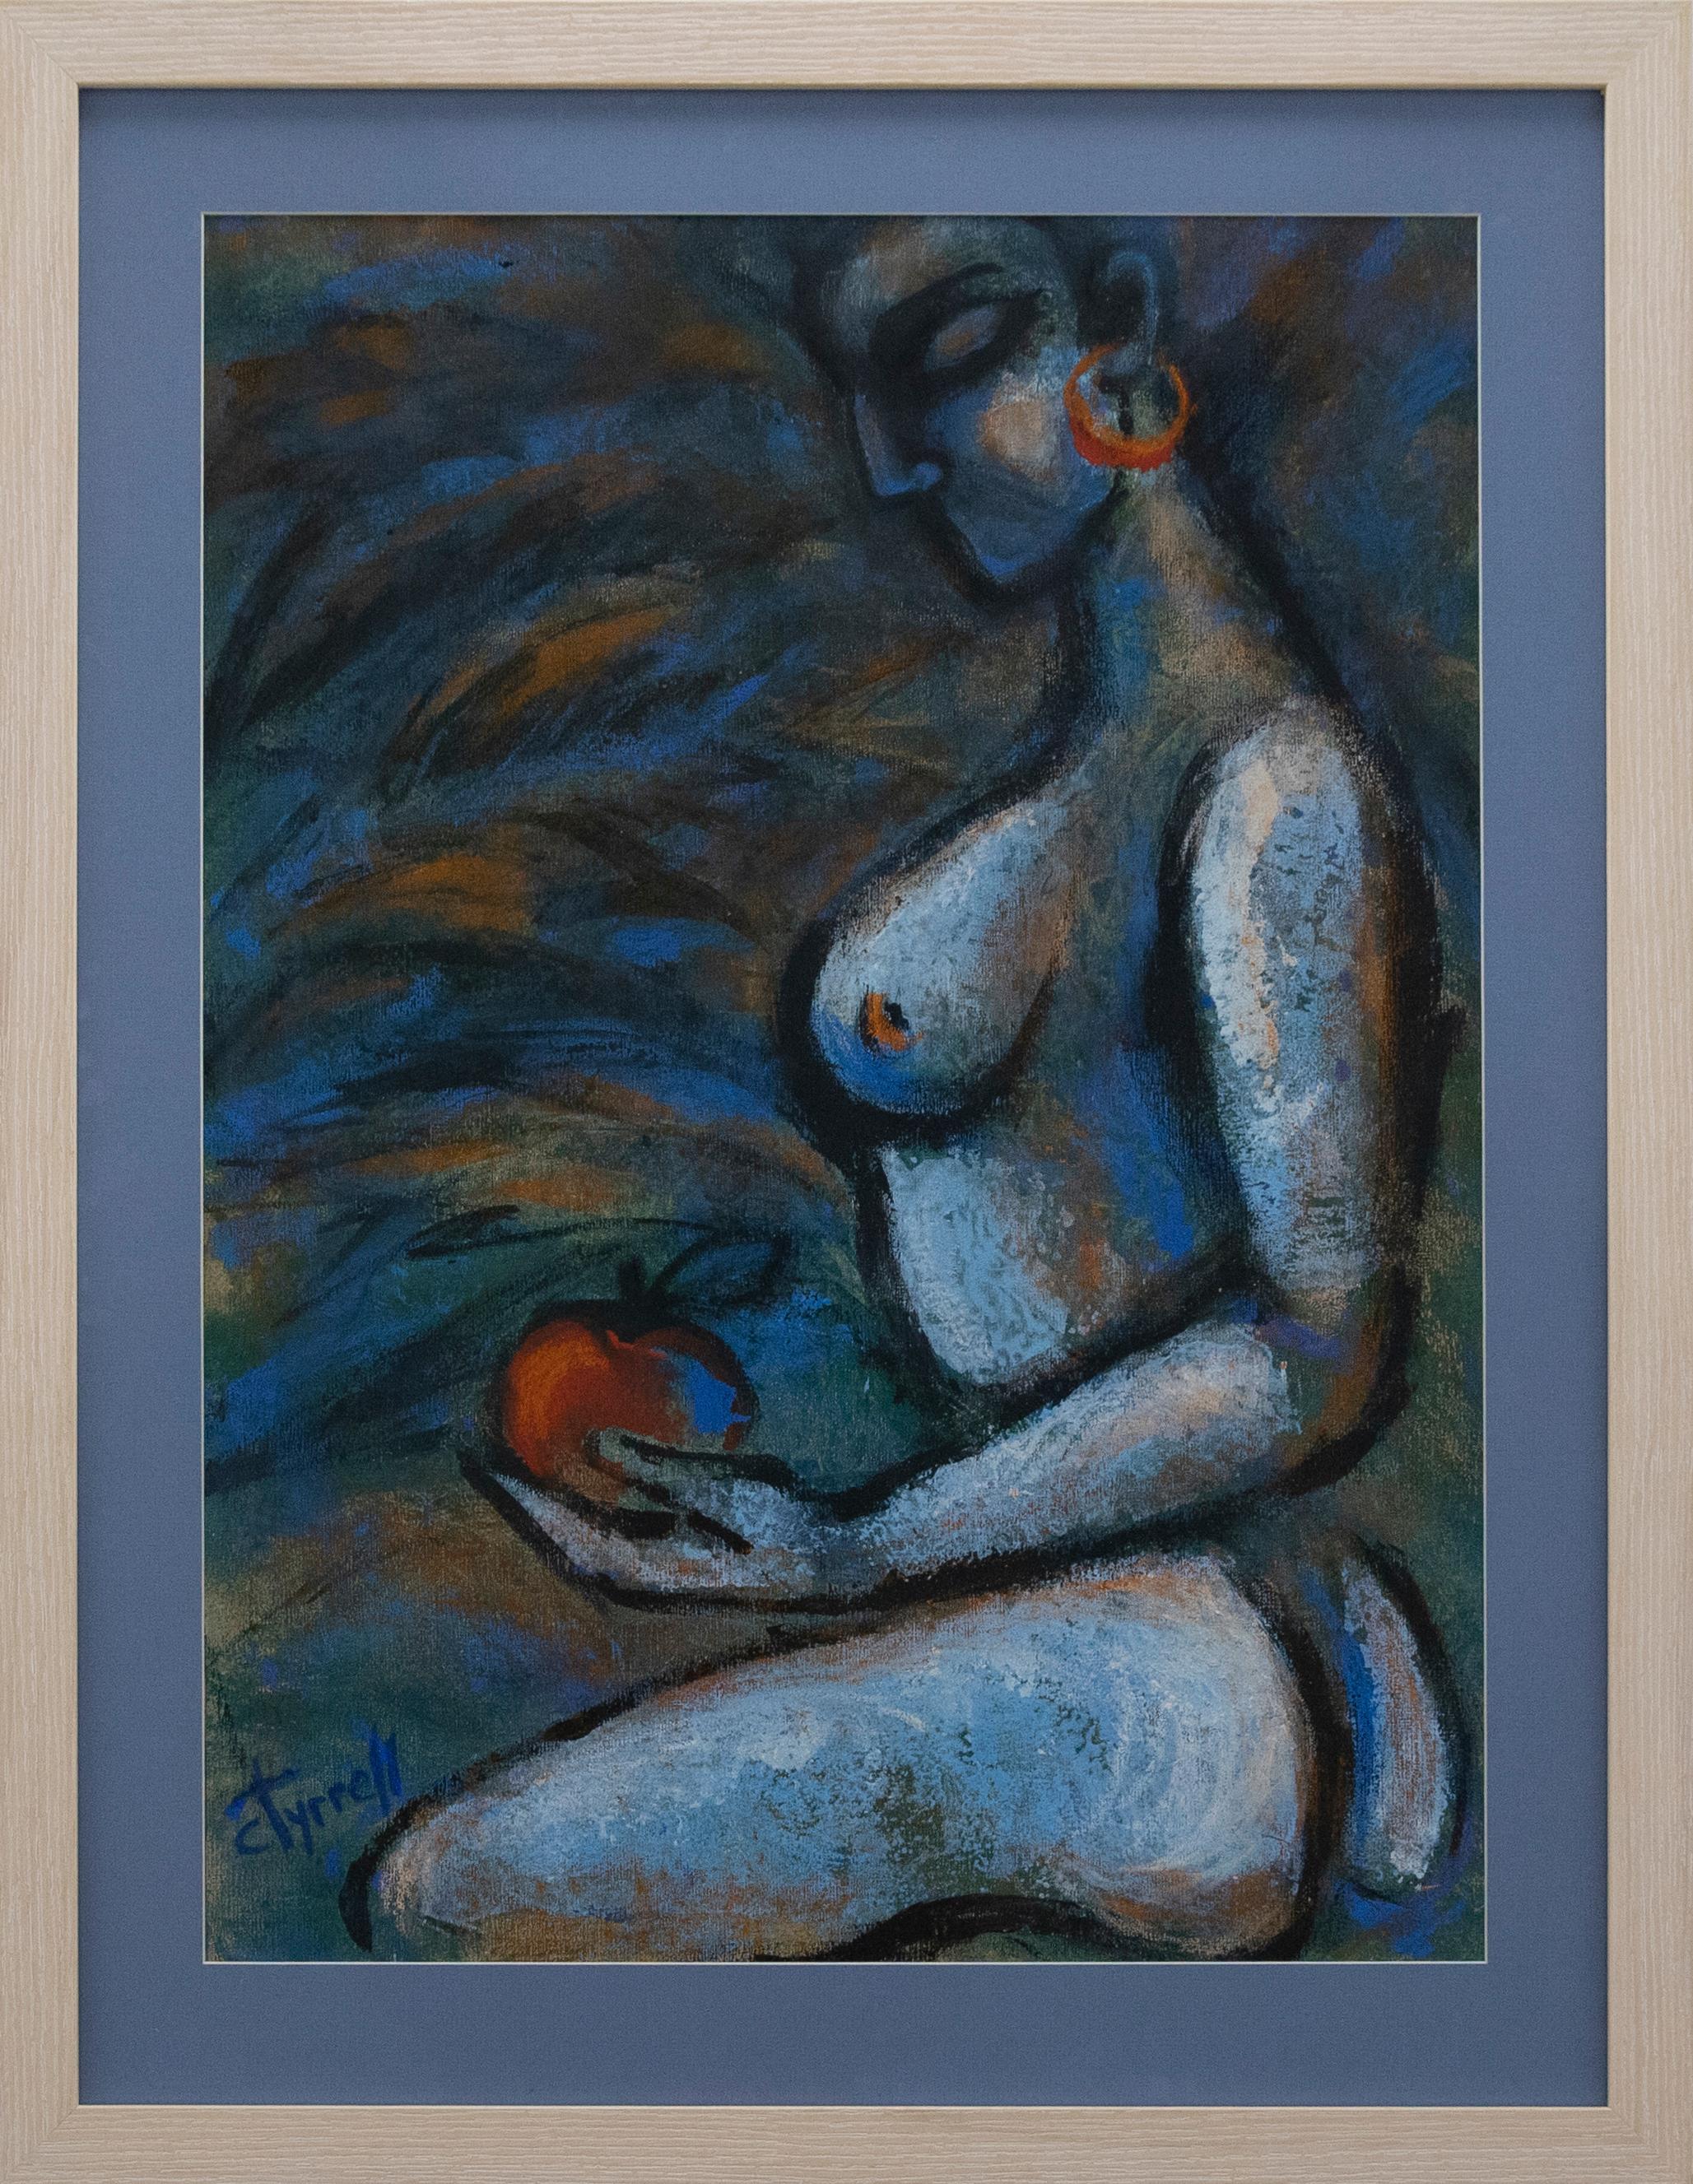 A large energetic acrylic honouring the female form by modern British artist Carmen Tyrrell. Well-presented in a dark blue mount and lime-washed frame. Signed. On canvas.